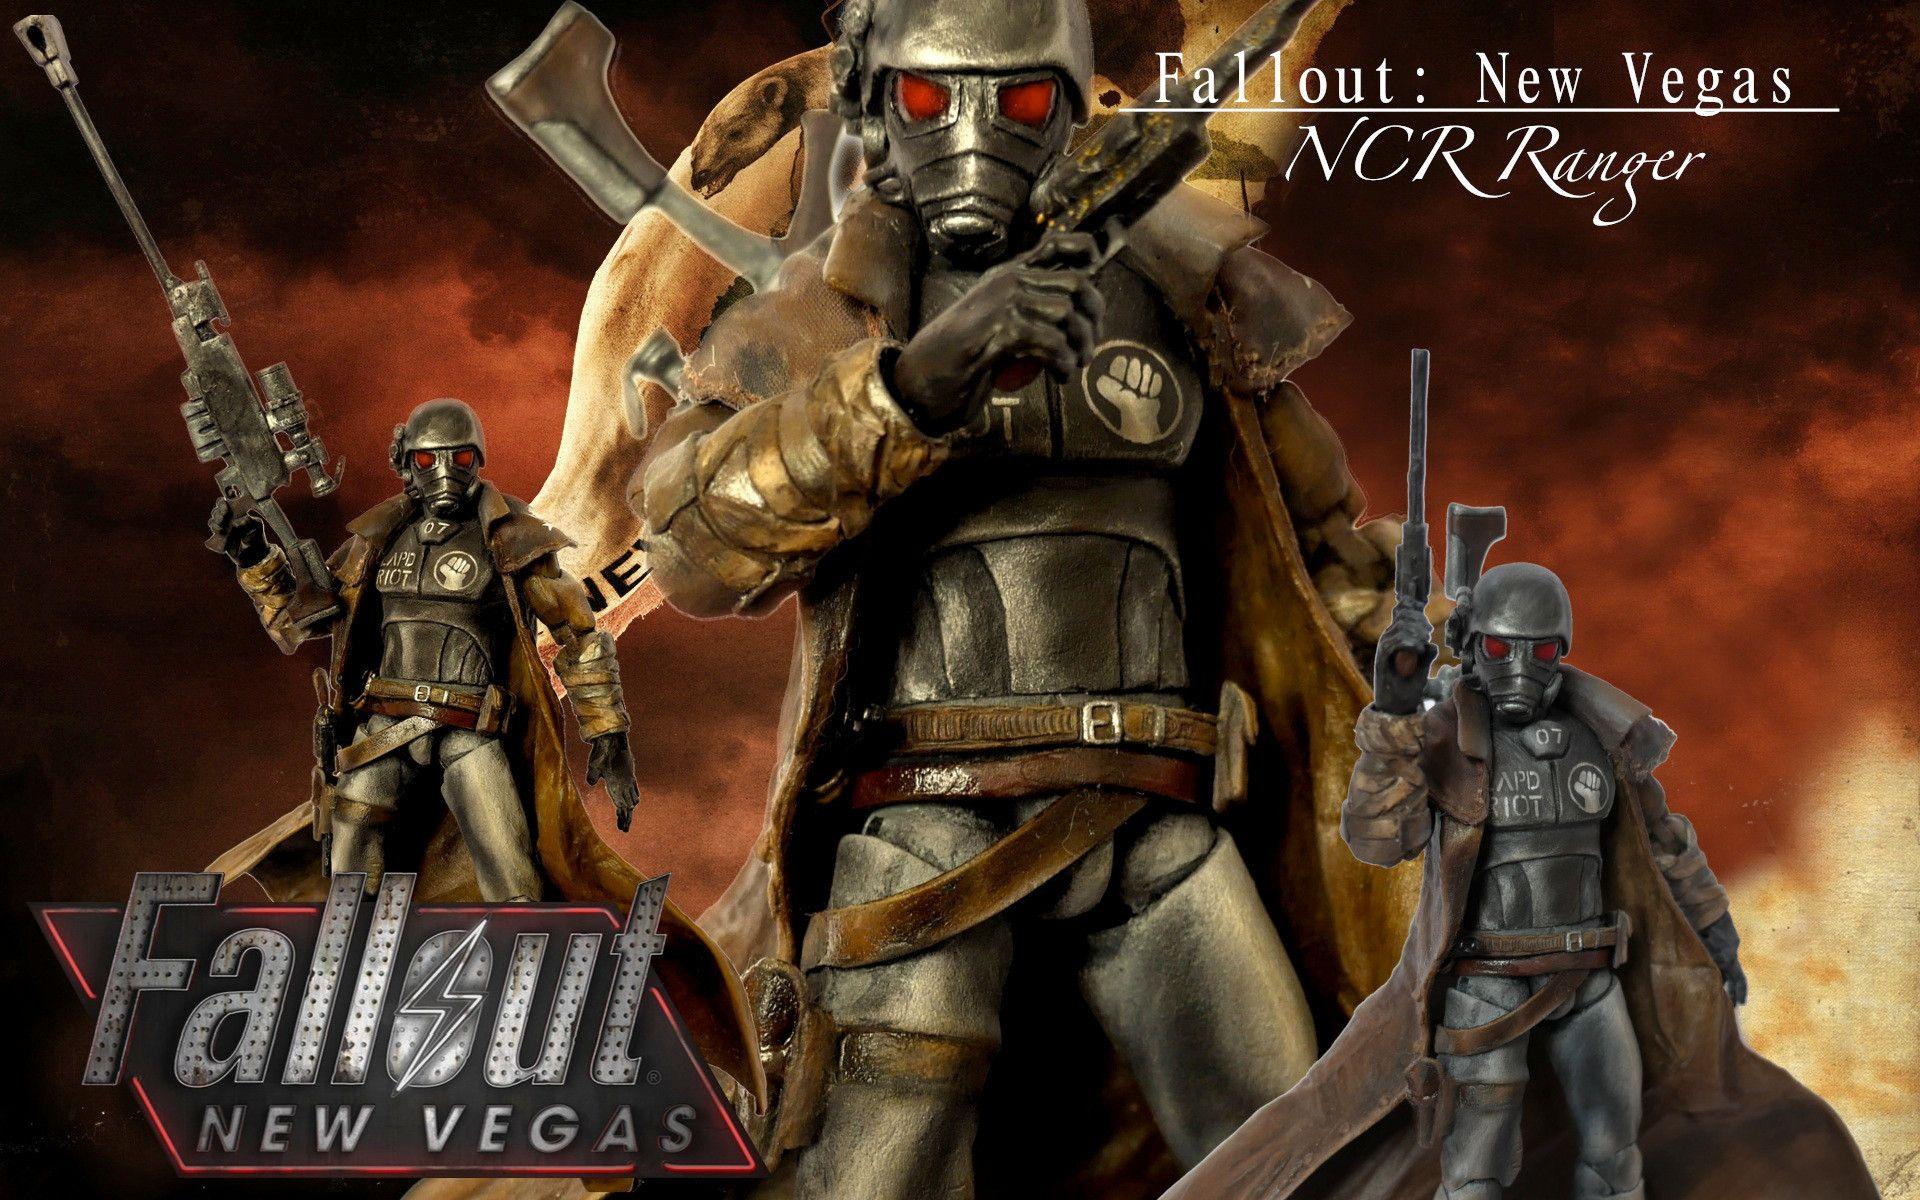 NCR ranger at Fallout New Vegas - mods and community